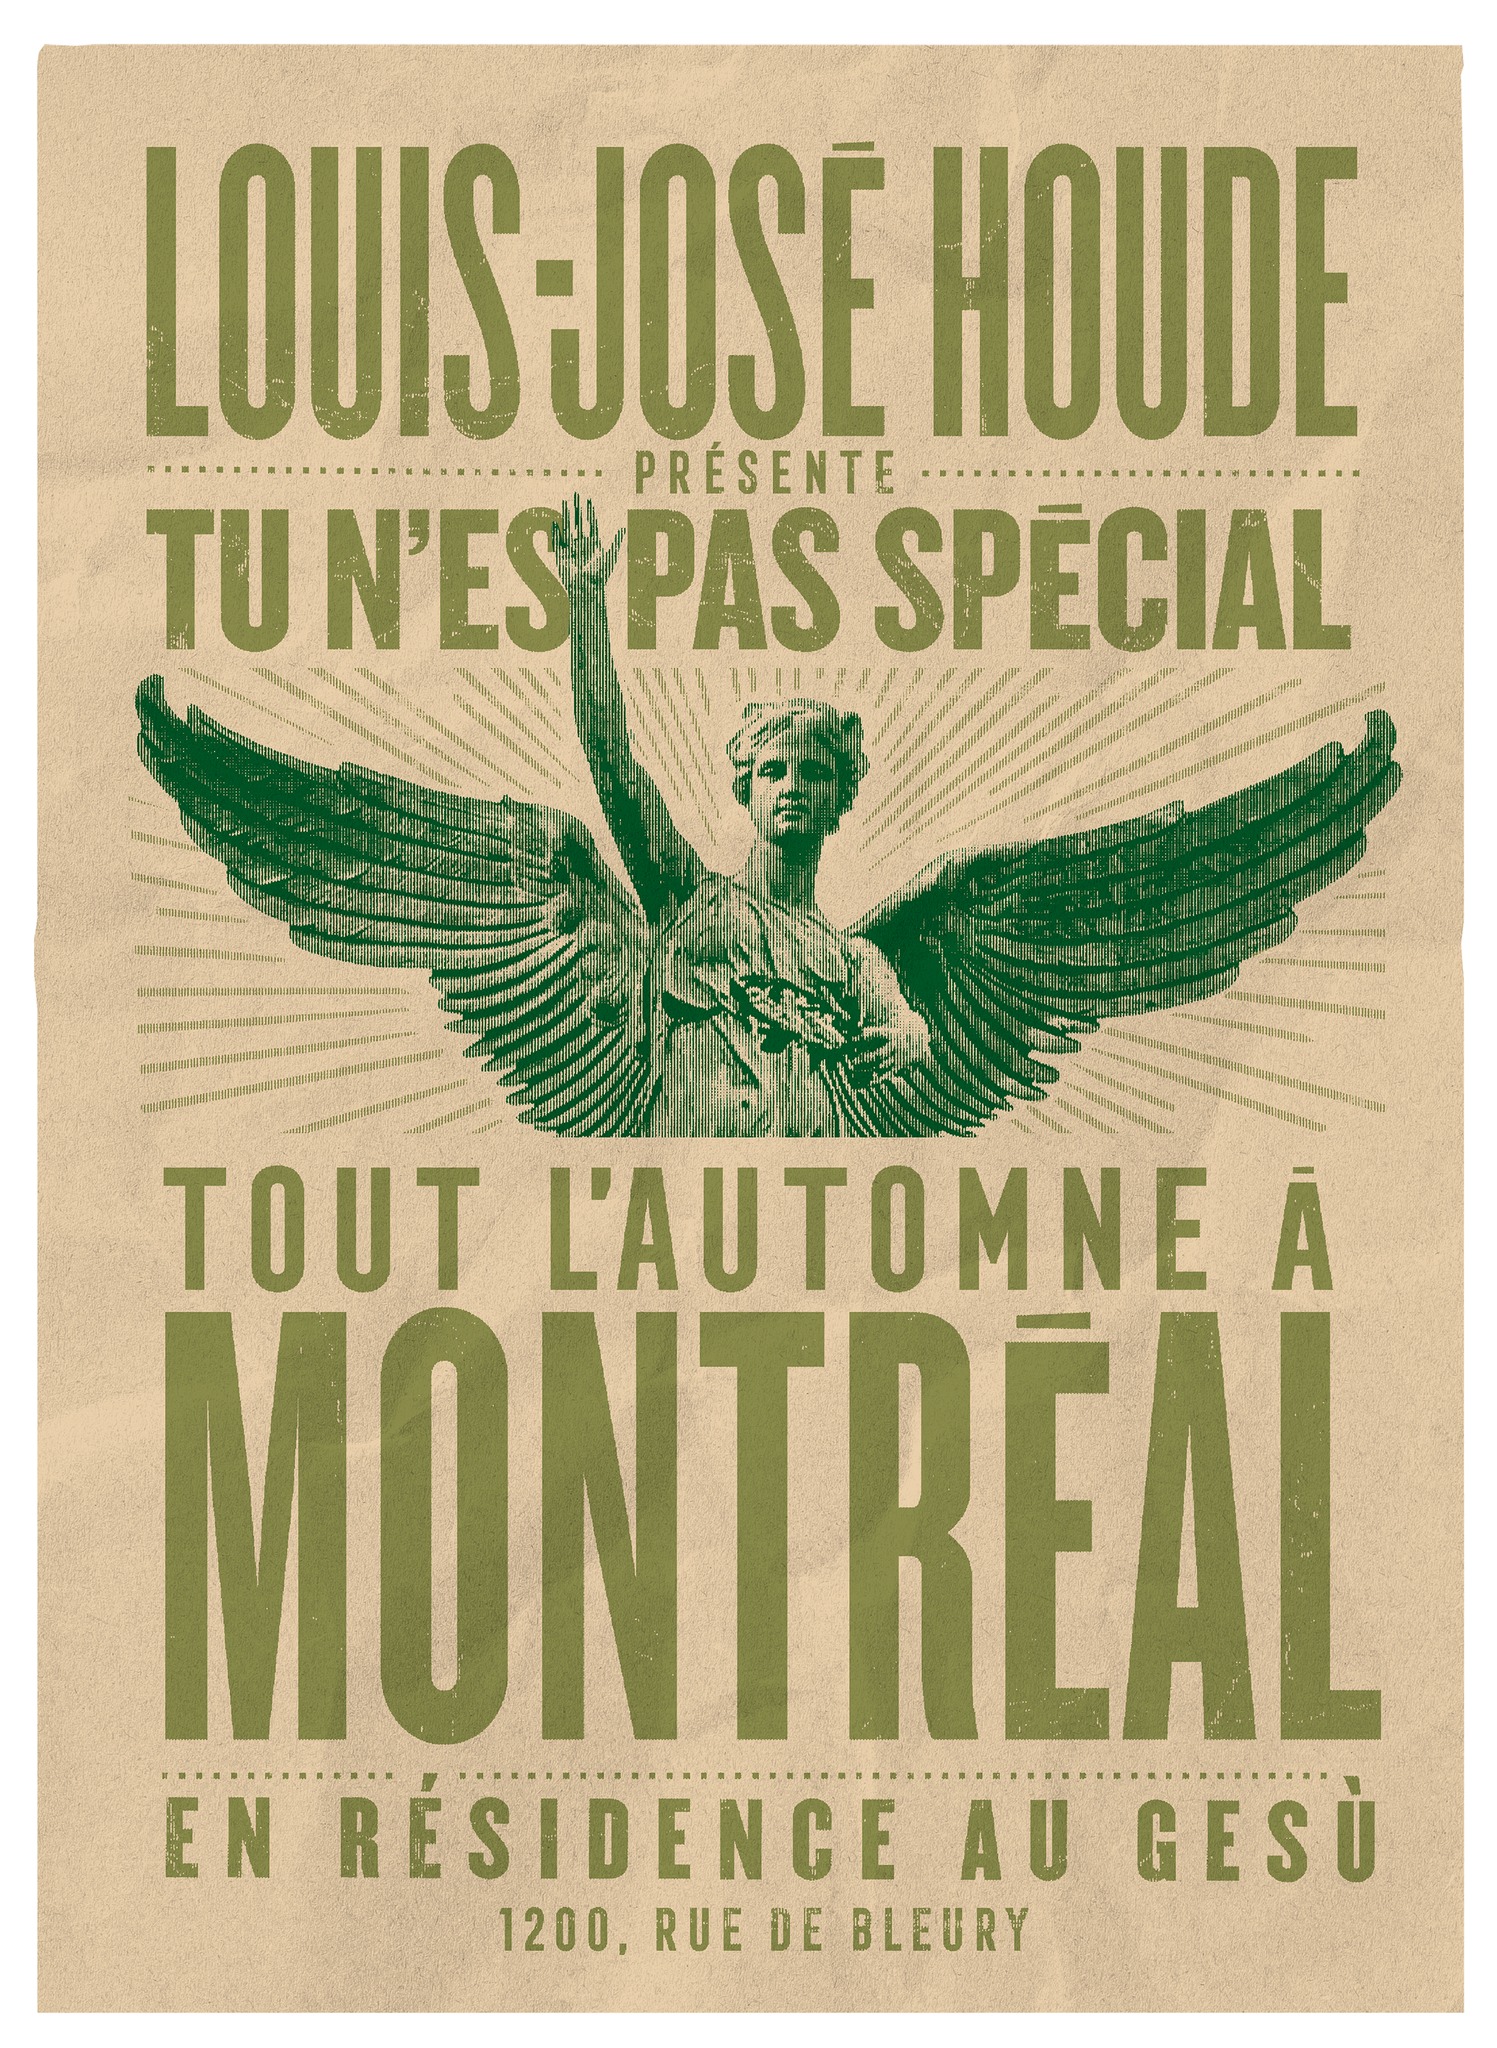 Louis-Jose Houde spectacle